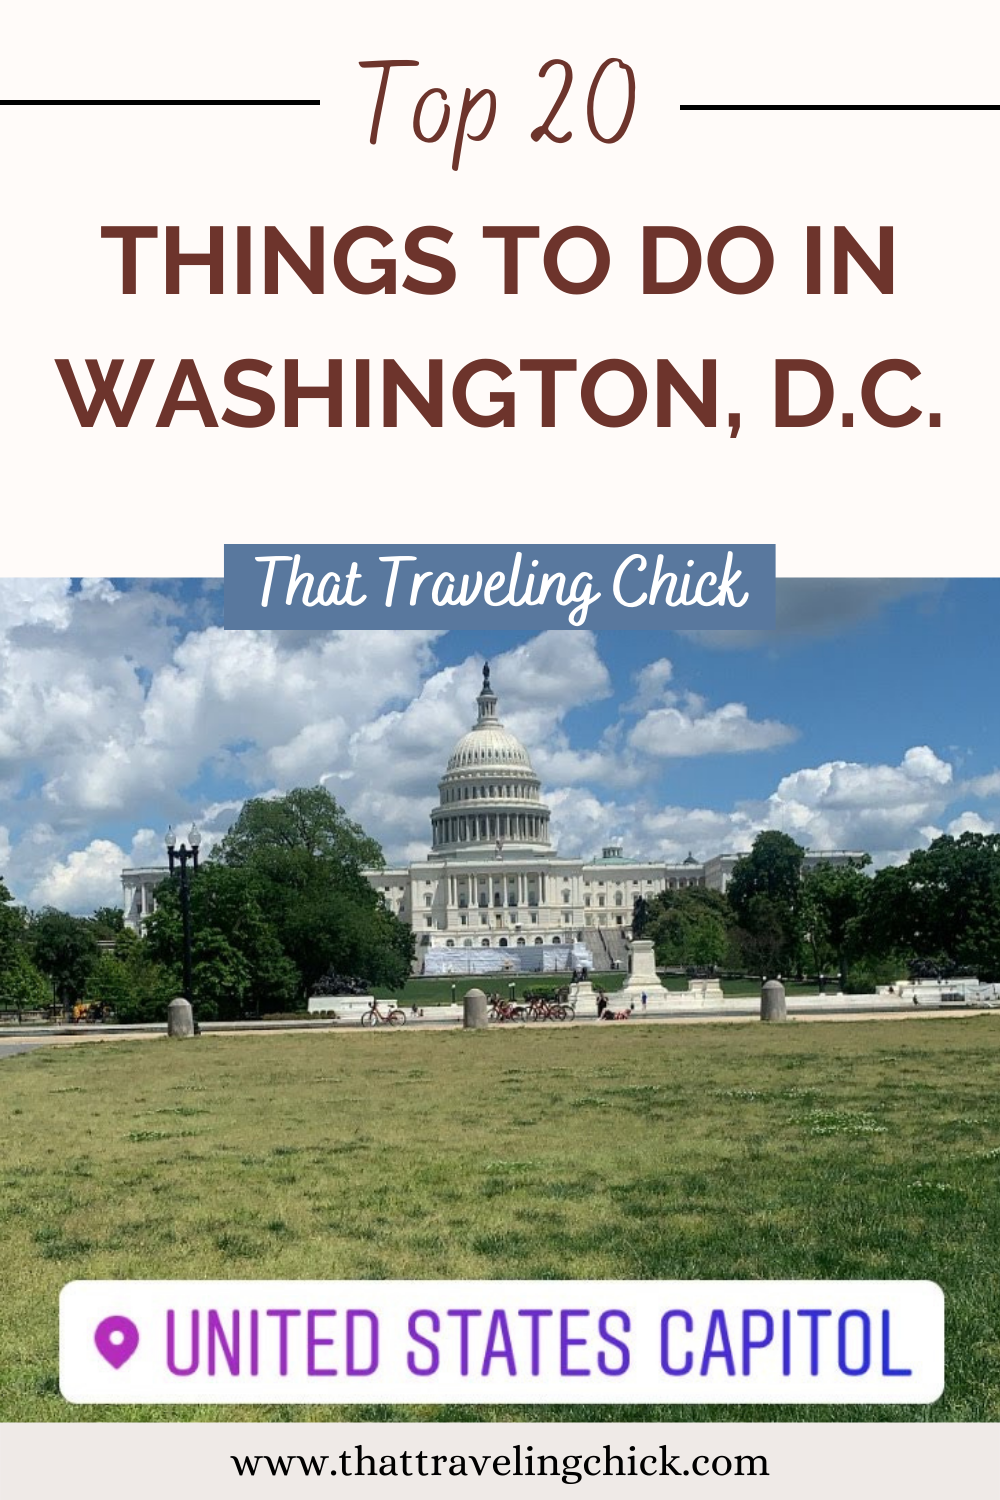 Top 20 Things to Do in Washington, D.C.